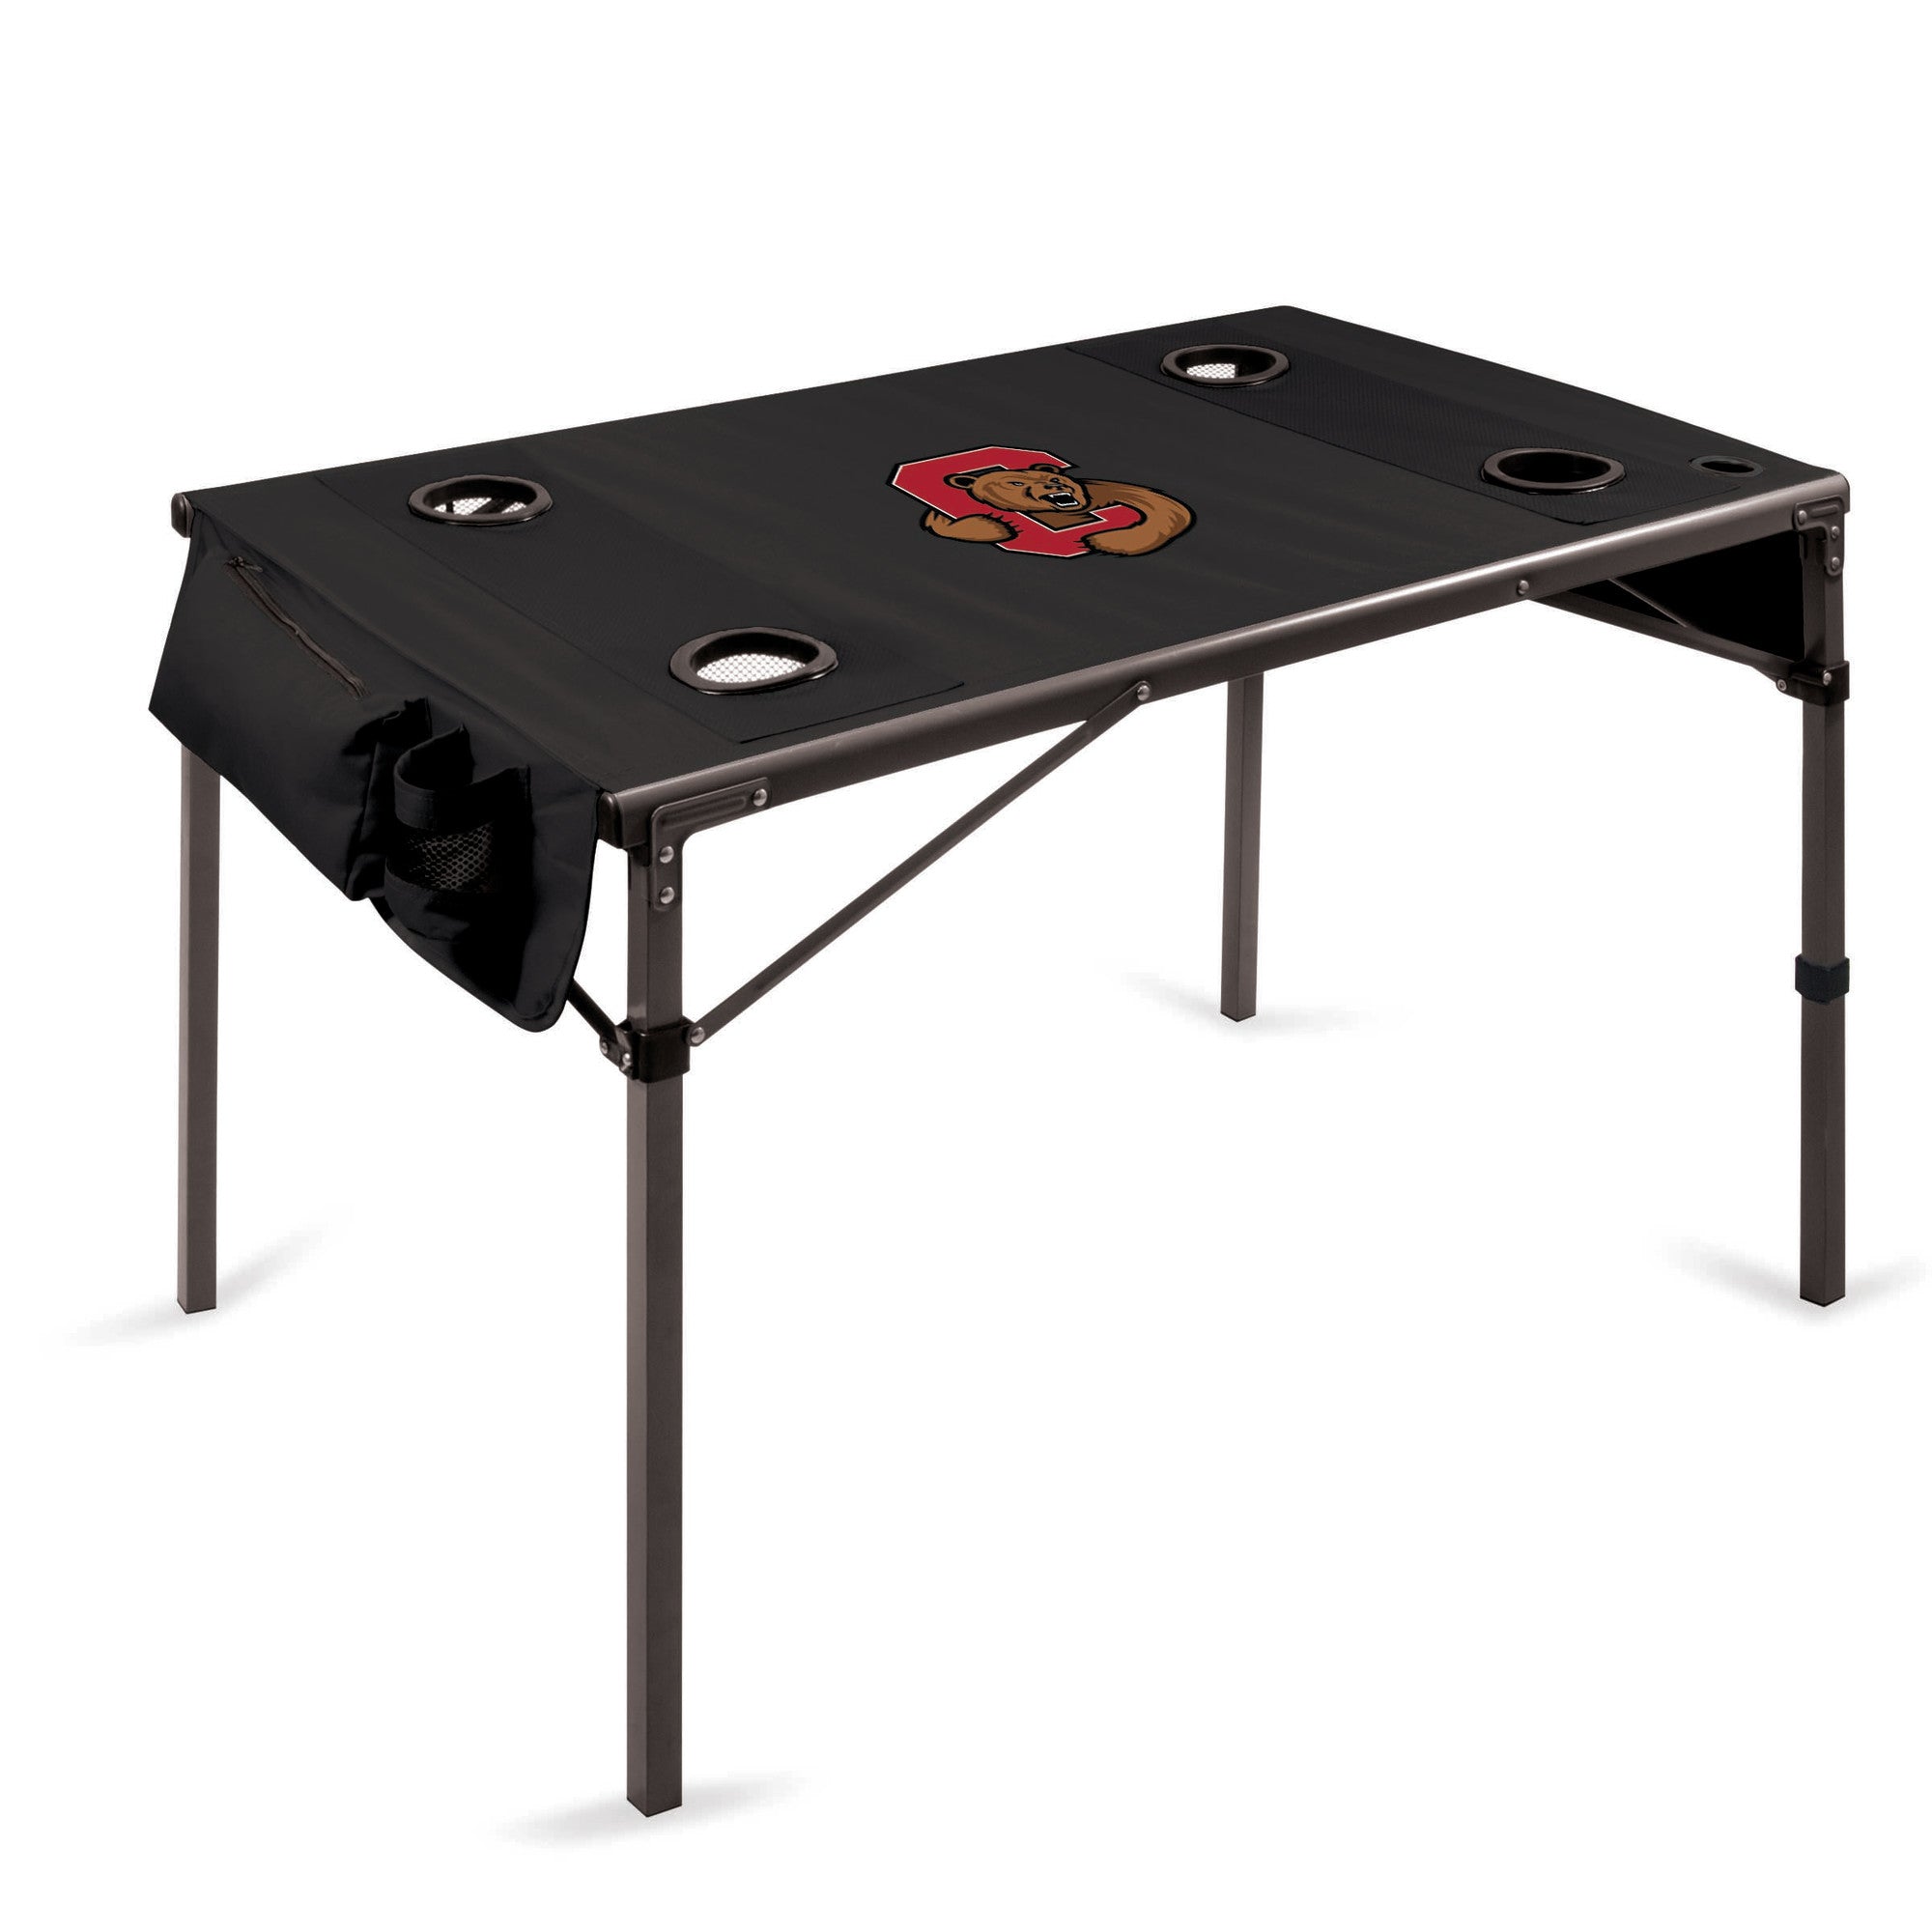 Cornell Big Red - Travel Table Portable Folding Table